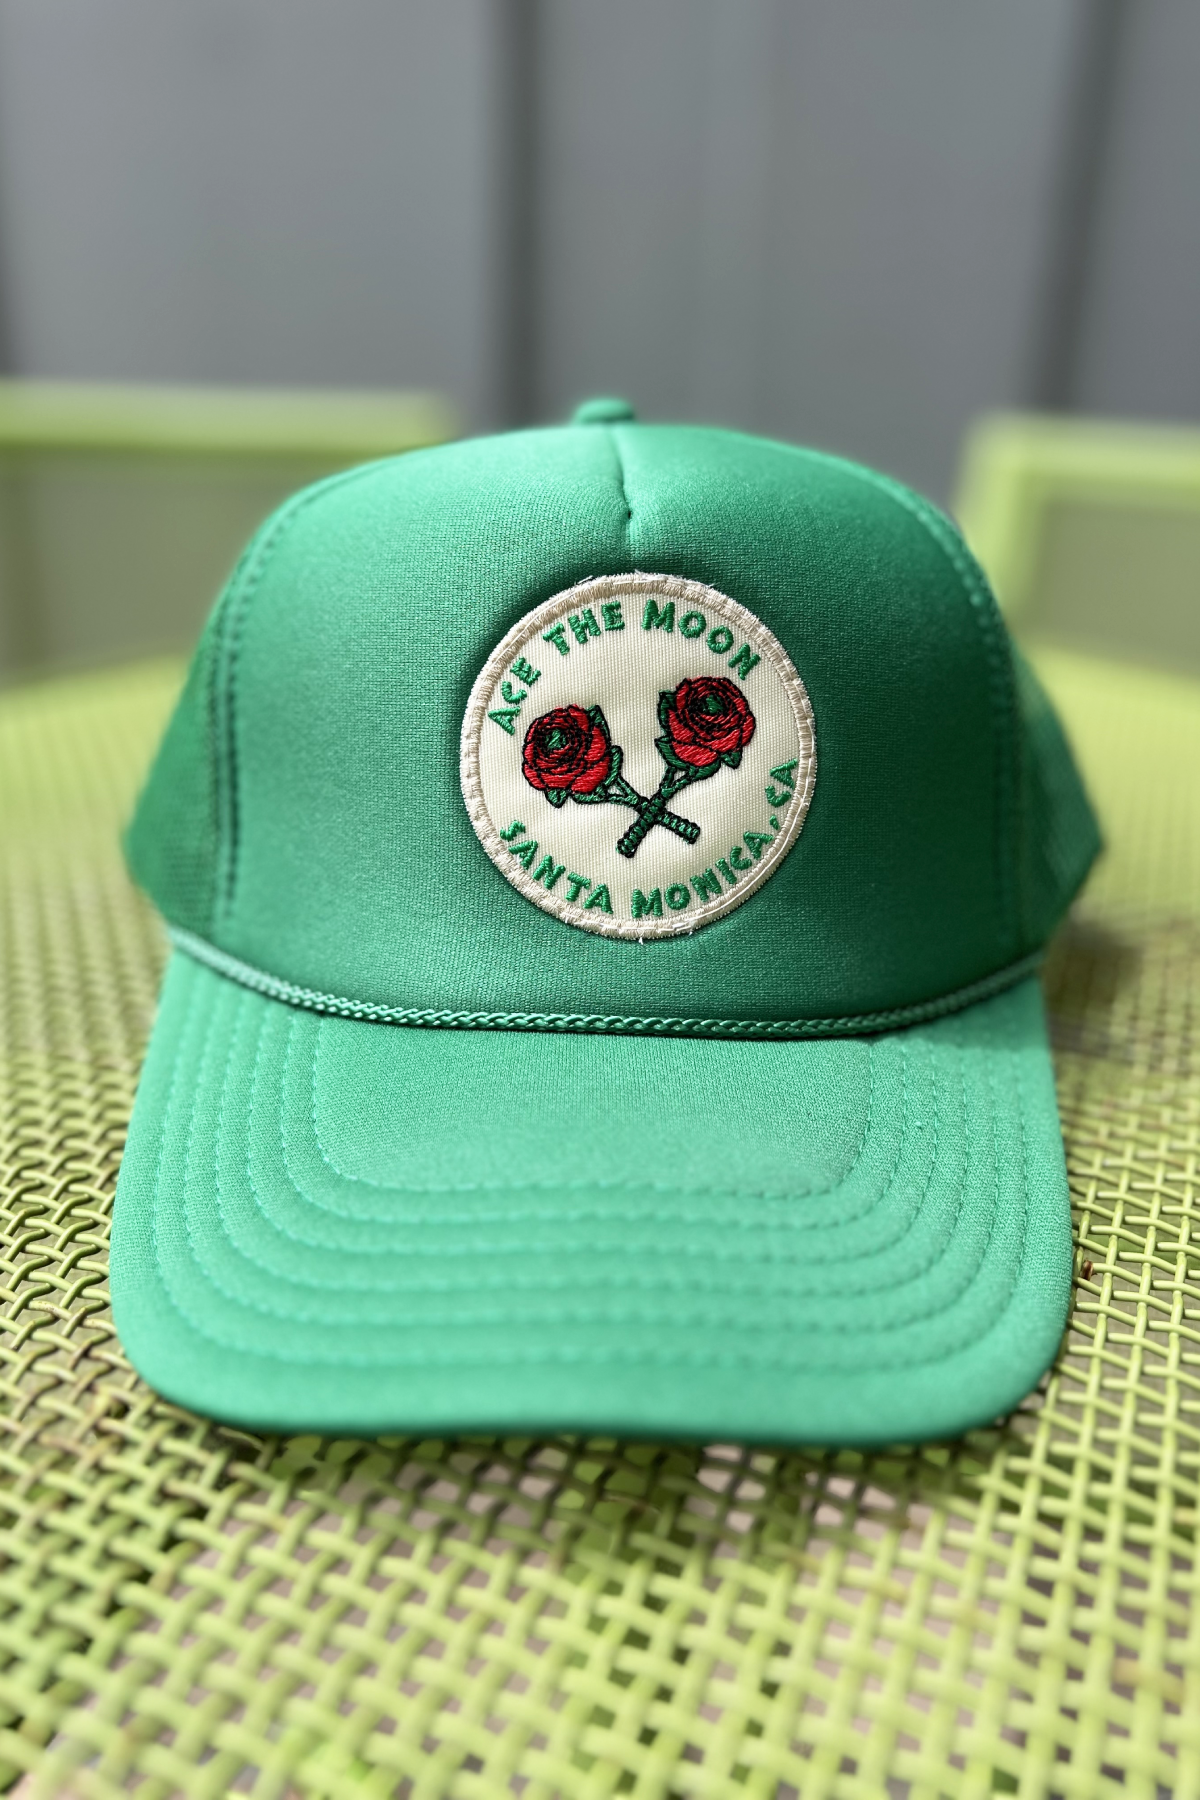 Ace the Moon Crossed Rose Racket Hat